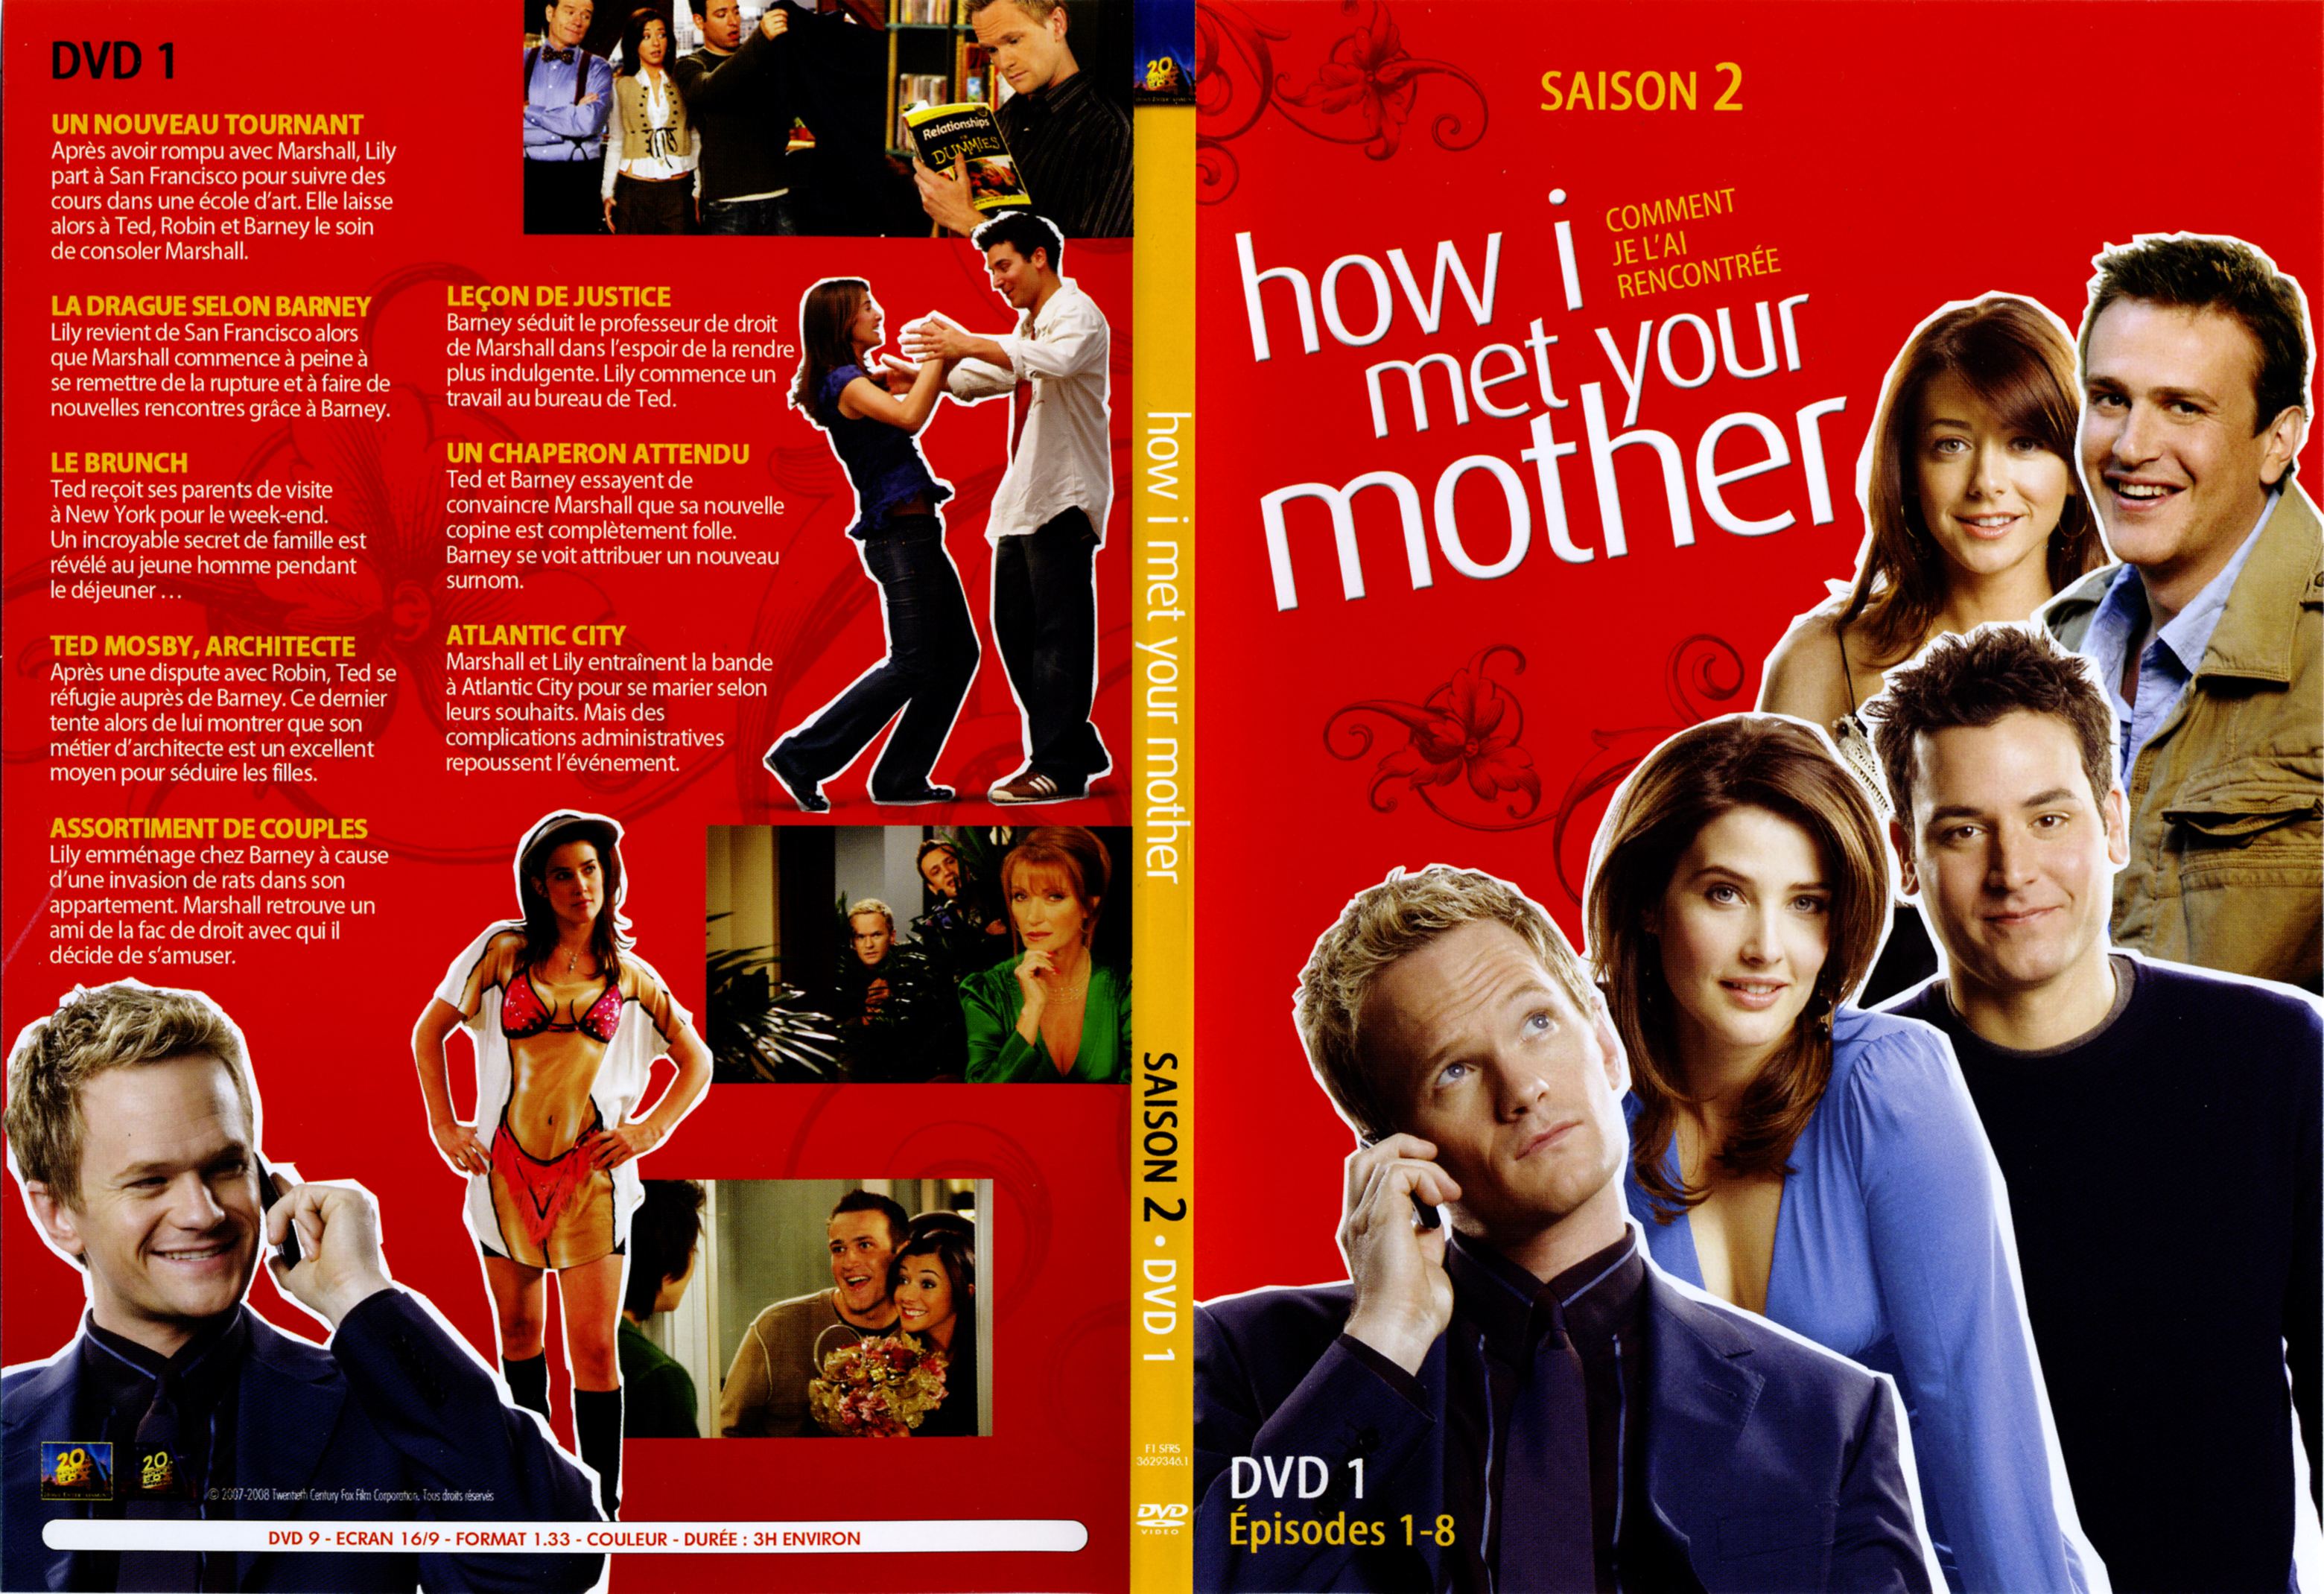 Jaquette DVD How i met your mother Saison 2 DVD 1